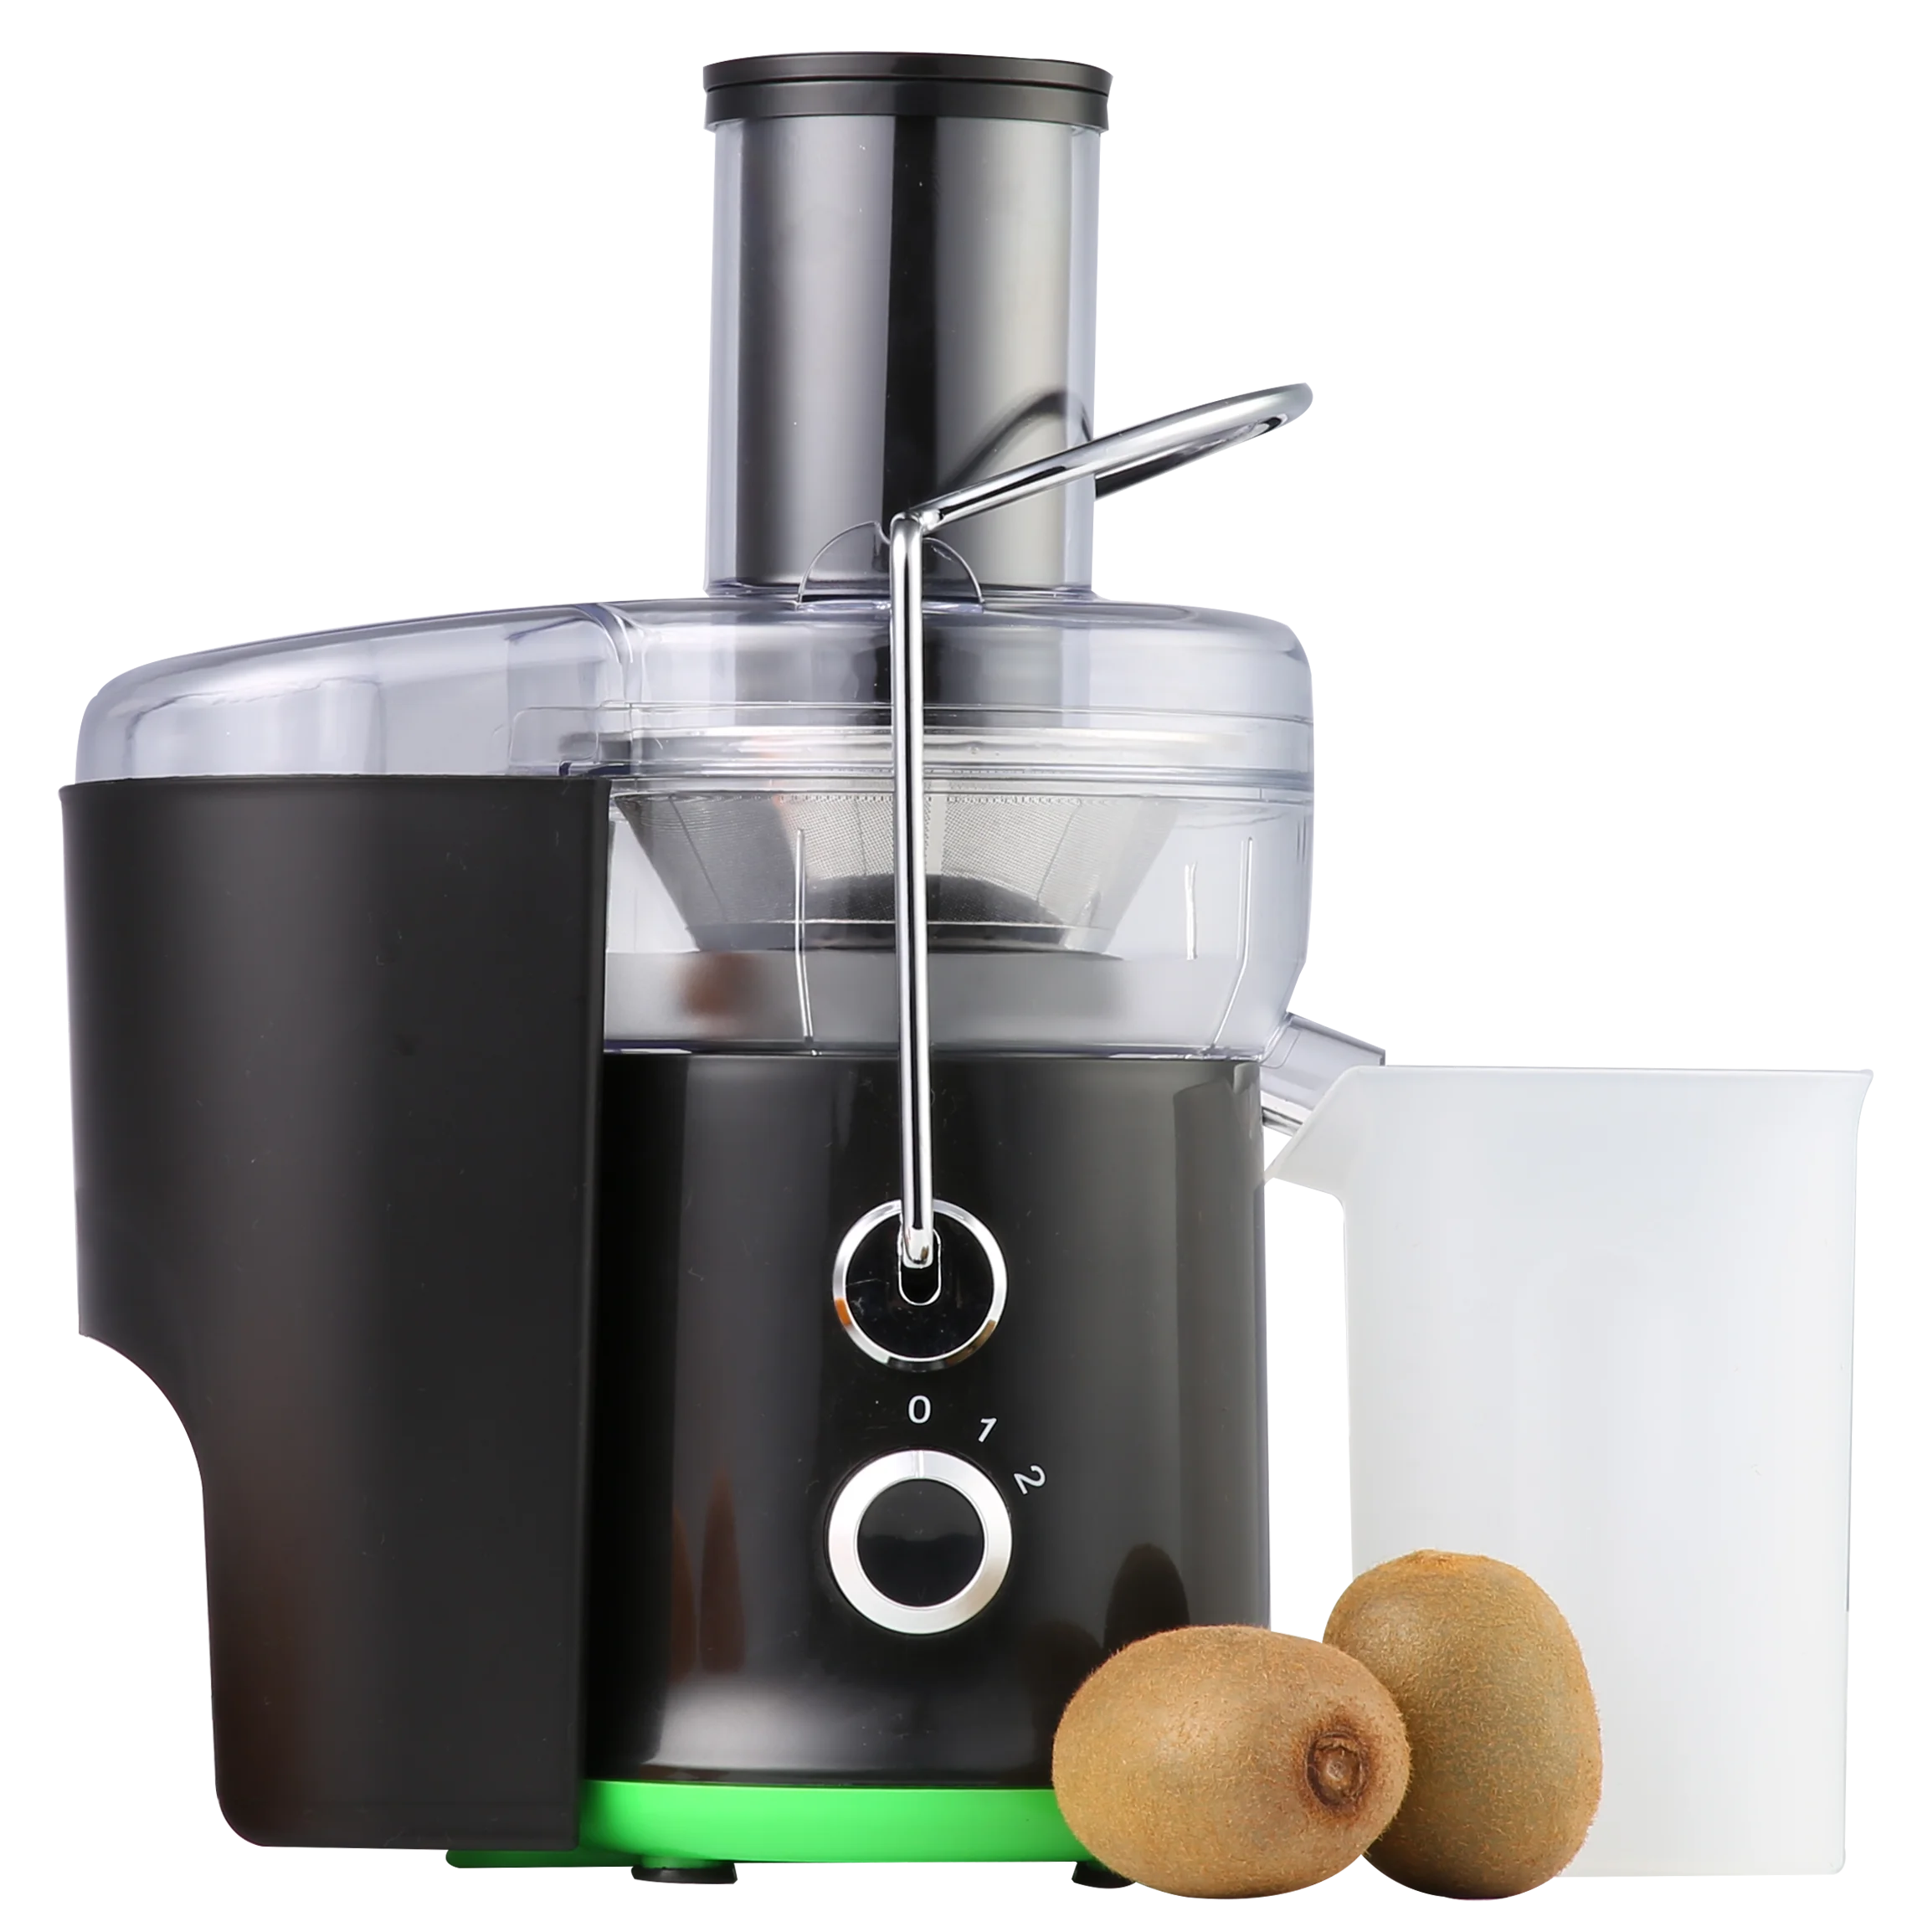 Juicer Machine 110V 500ML Stainless Steel Juicer Machine Whole Fruit Vegetable Centrifugal Juice Extractor for Fruit Vegetable 10.6 x 6.9 x 13 inch 